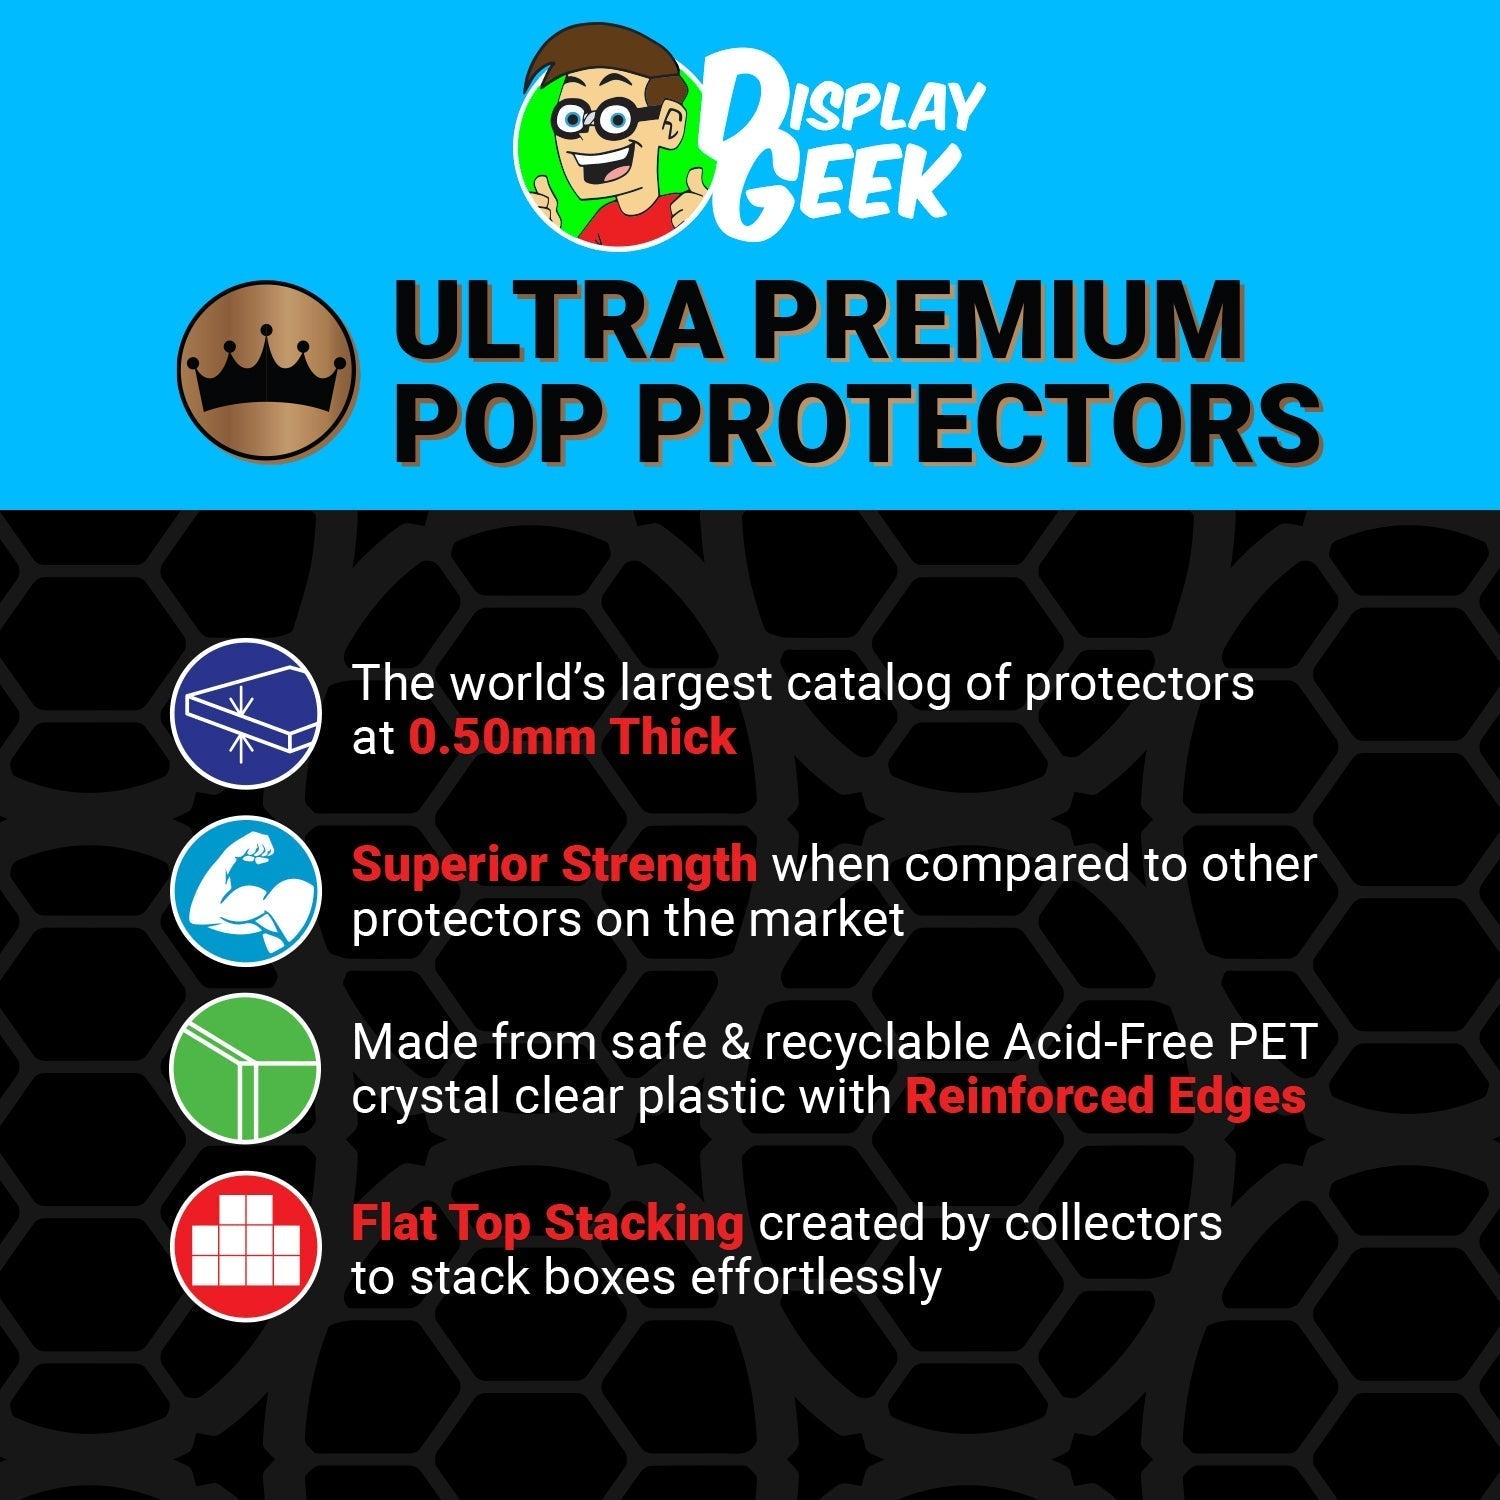 Pop Protector for Ant-Man Funko Pop Pez - PPG Pop Protector Guide Search Created by Display Geek